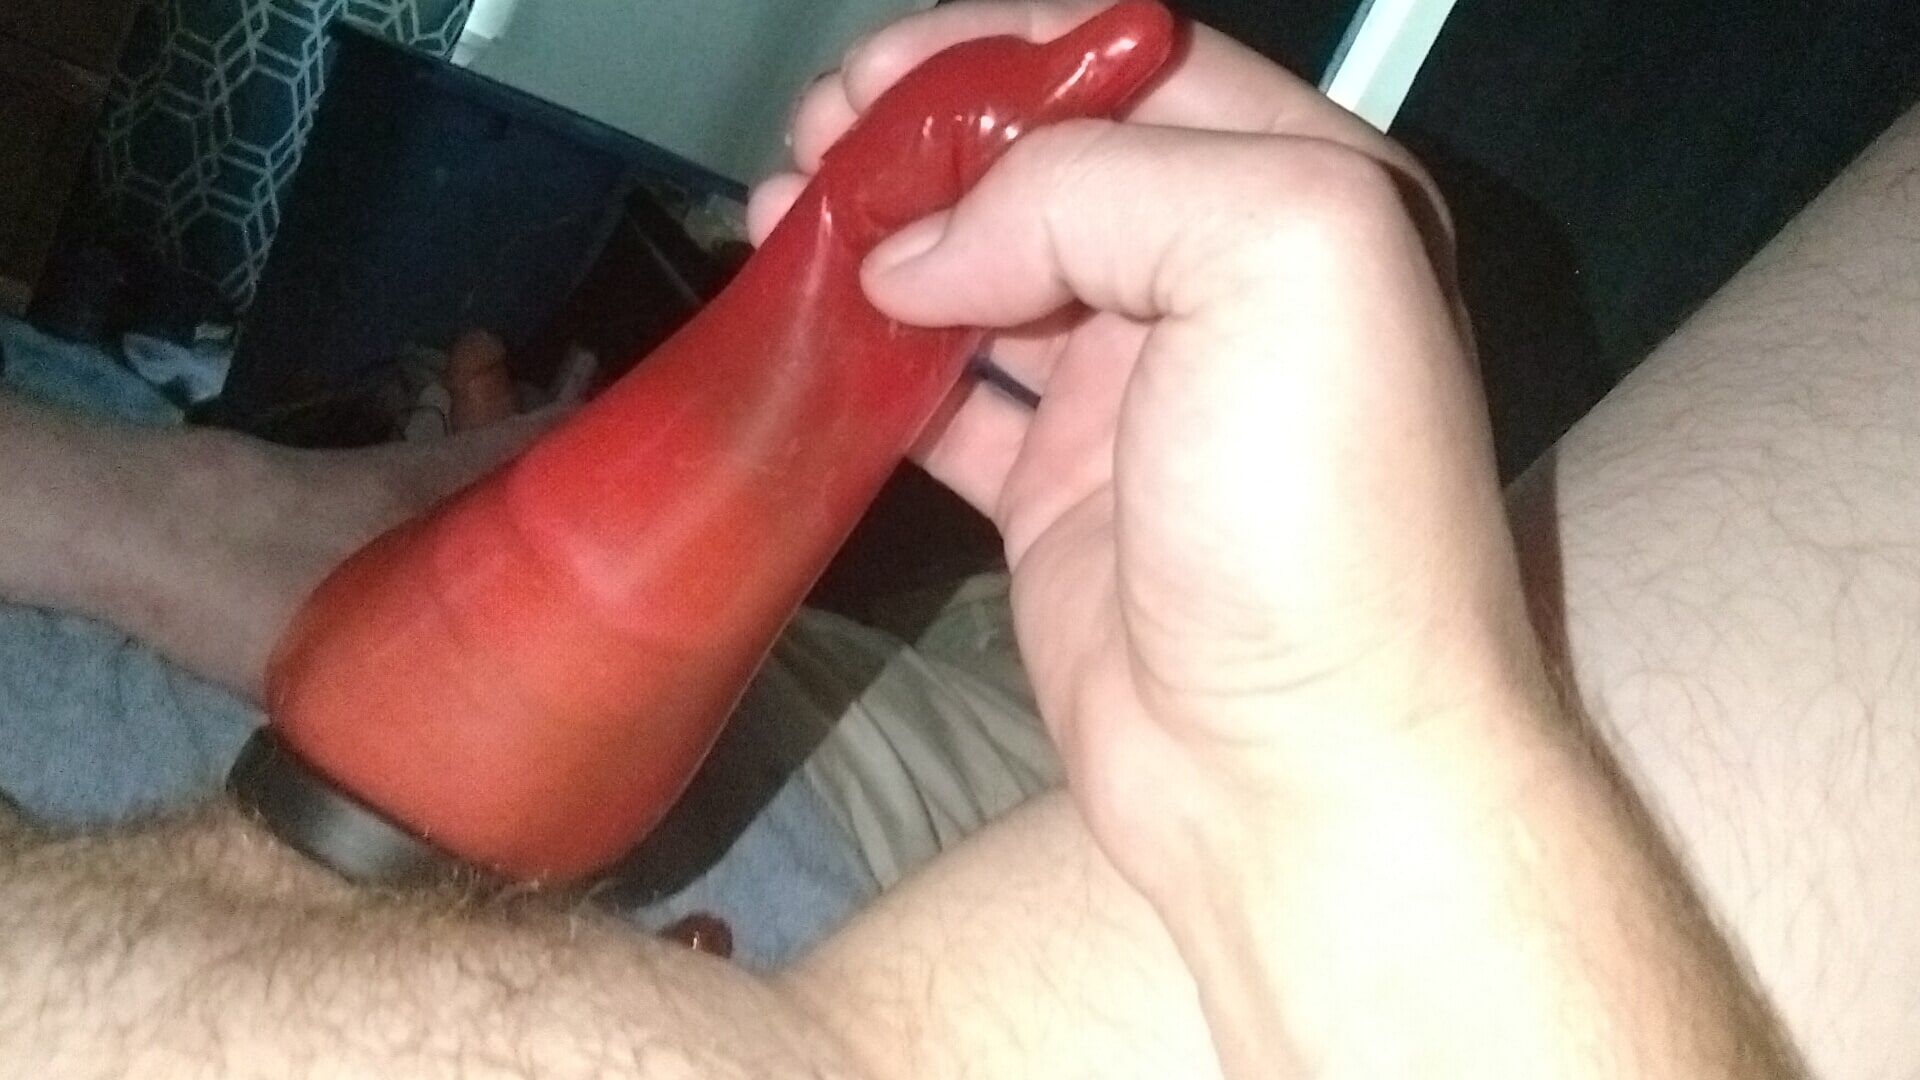 Just some random pics of my cock and my asshole  #3